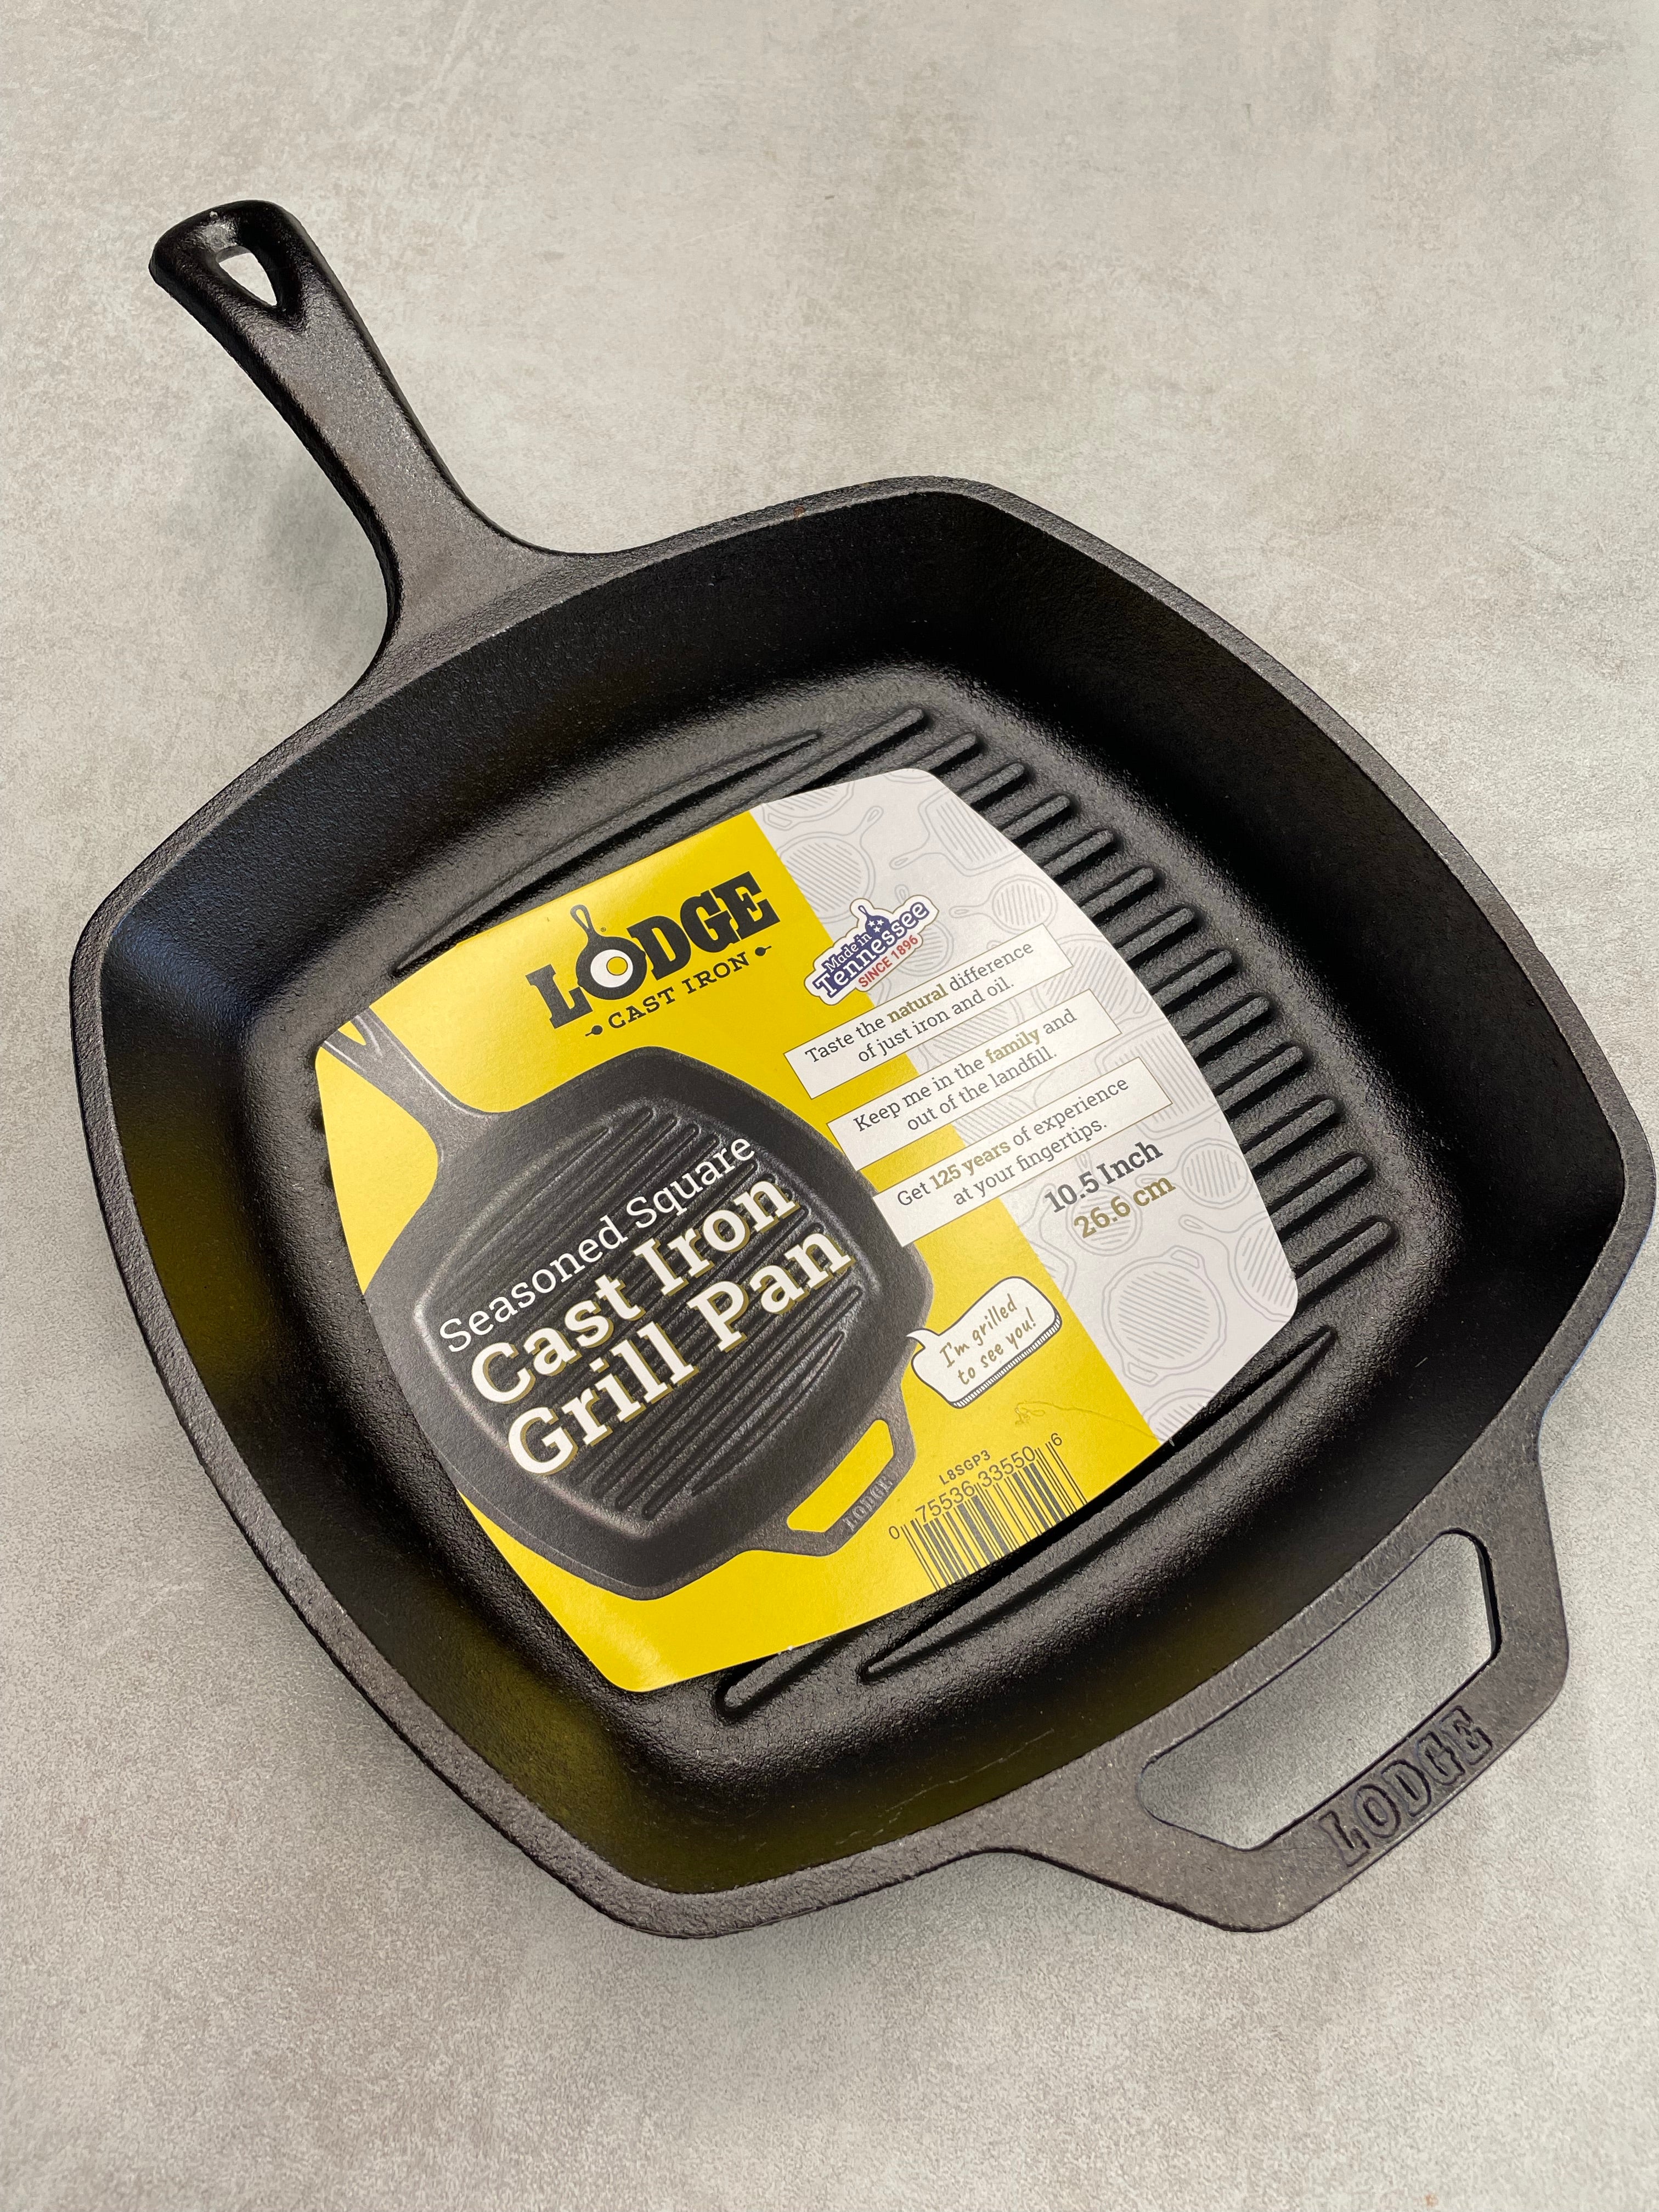 Square Cast Iron Grill Pan - 10.5 Inch